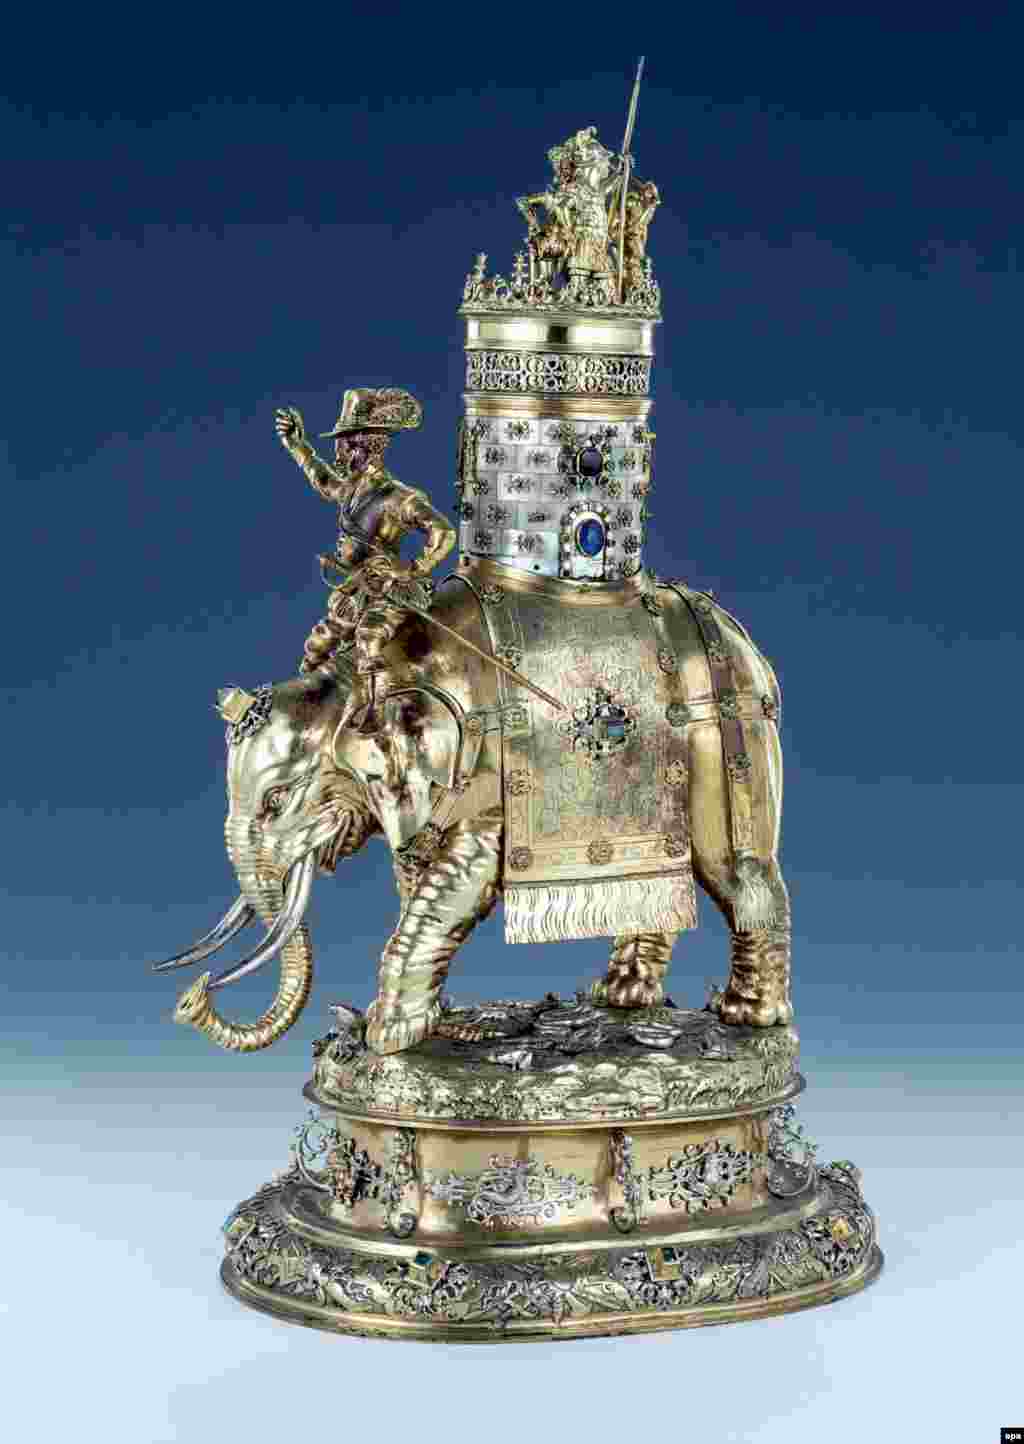 &quot;War Elephant&quot; made by&nbsp;Urban Wolff in Nuremberg between 1593 and 1598. This work is made of silver, gilt, mother of pearl, and colored stones.